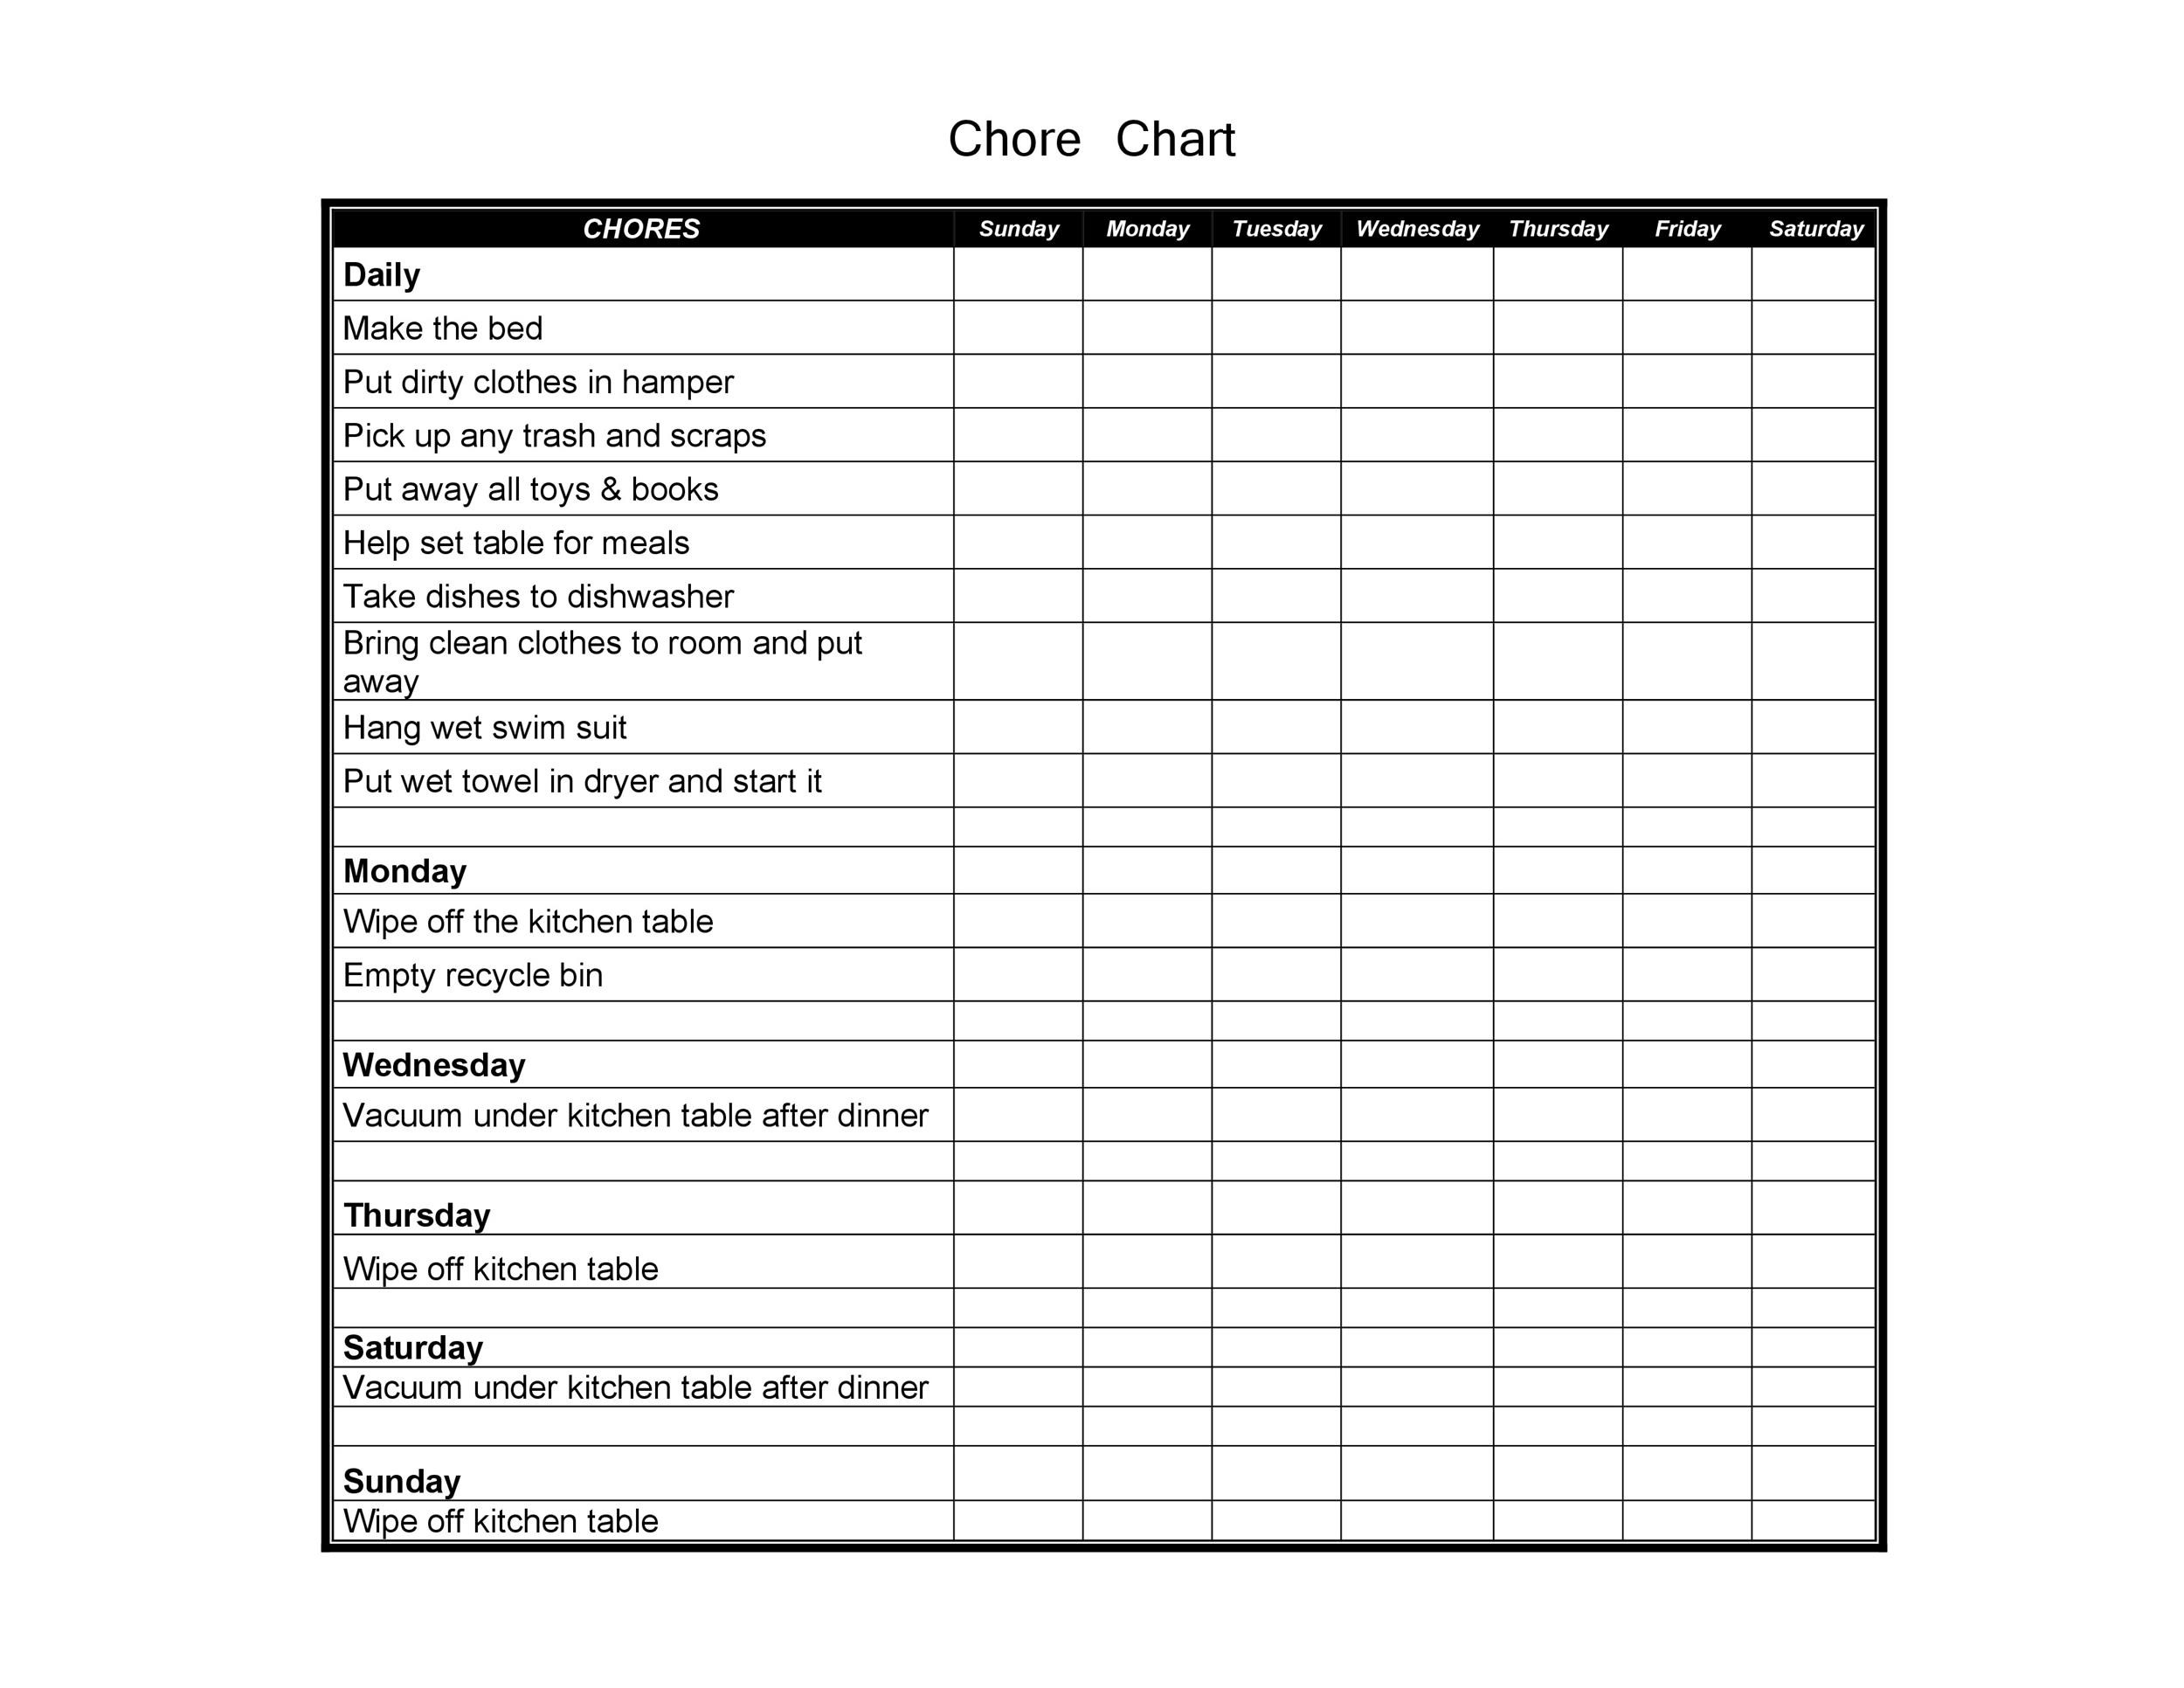 Daily Chore Chart Template